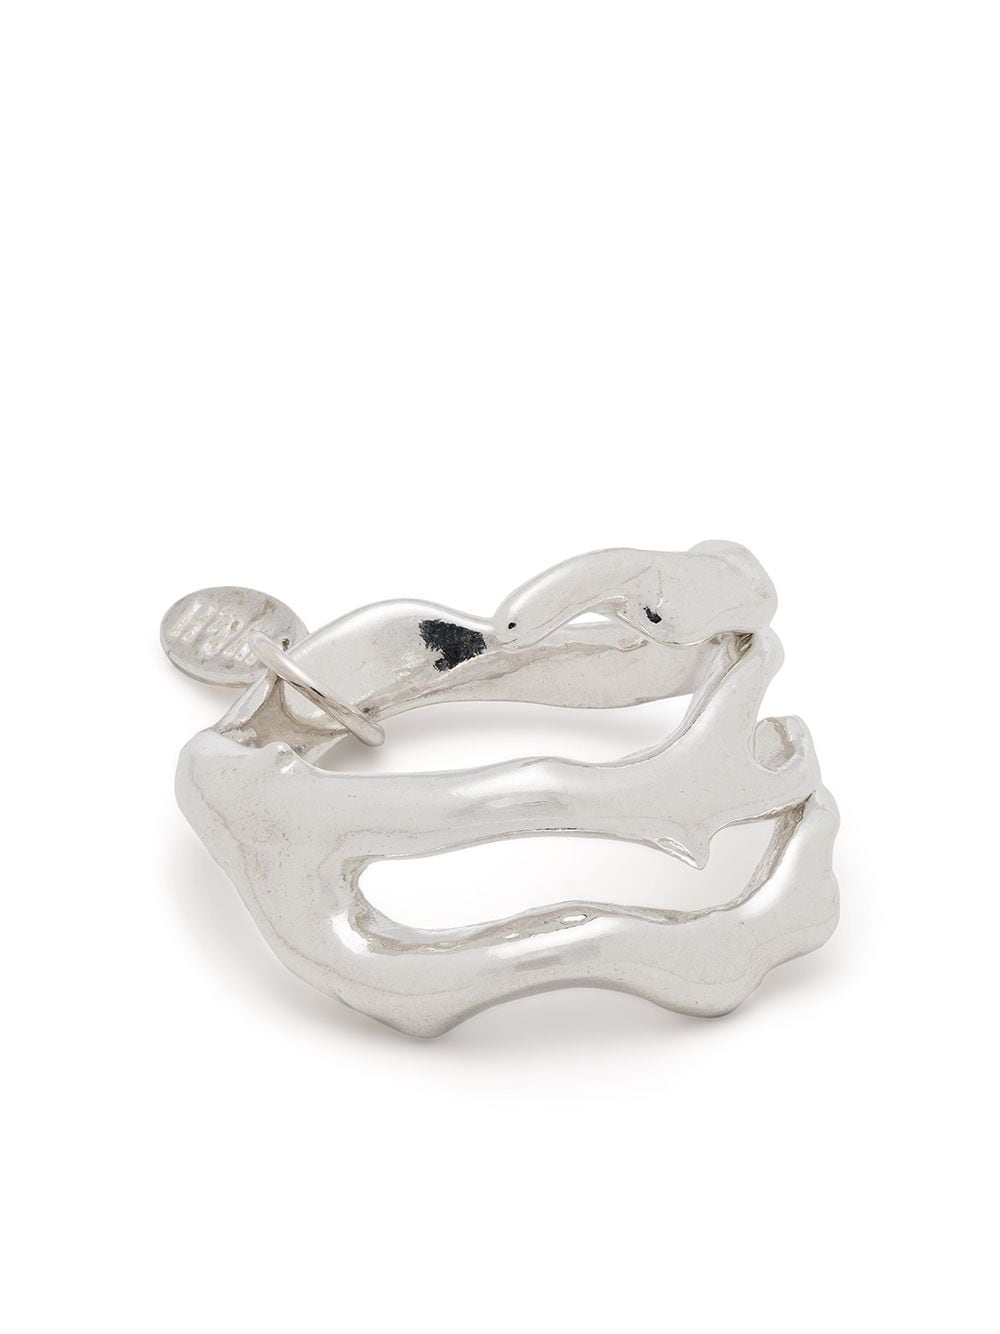 Wouters & Hendrix Voyages Naturalistes wide-band ring - Silver von Wouters & Hendrix